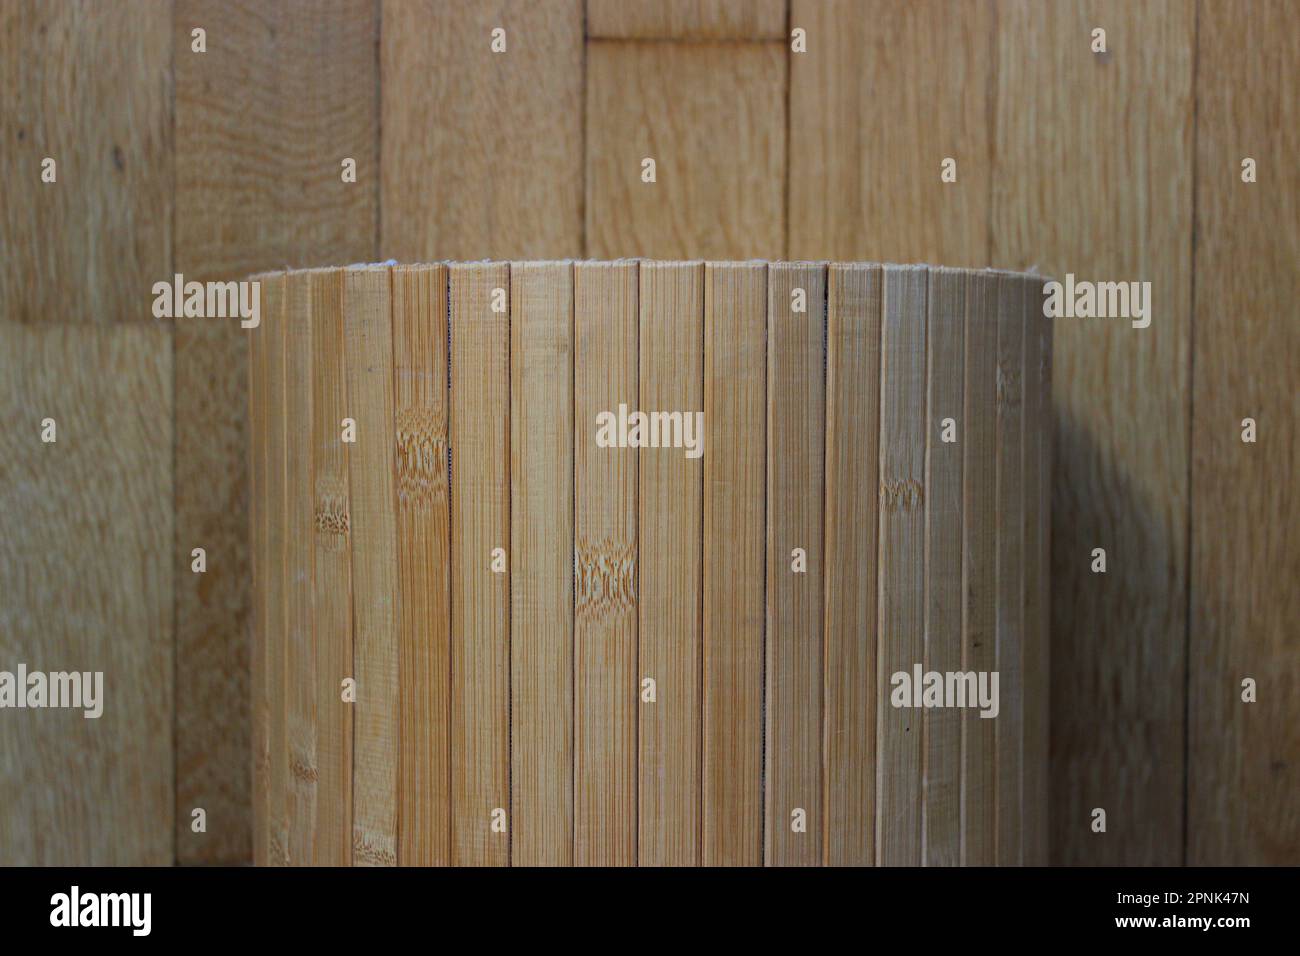 Bamboo Planks Roll On A Wooden Parquet Stock Photo For Backgrounds Stock Photo